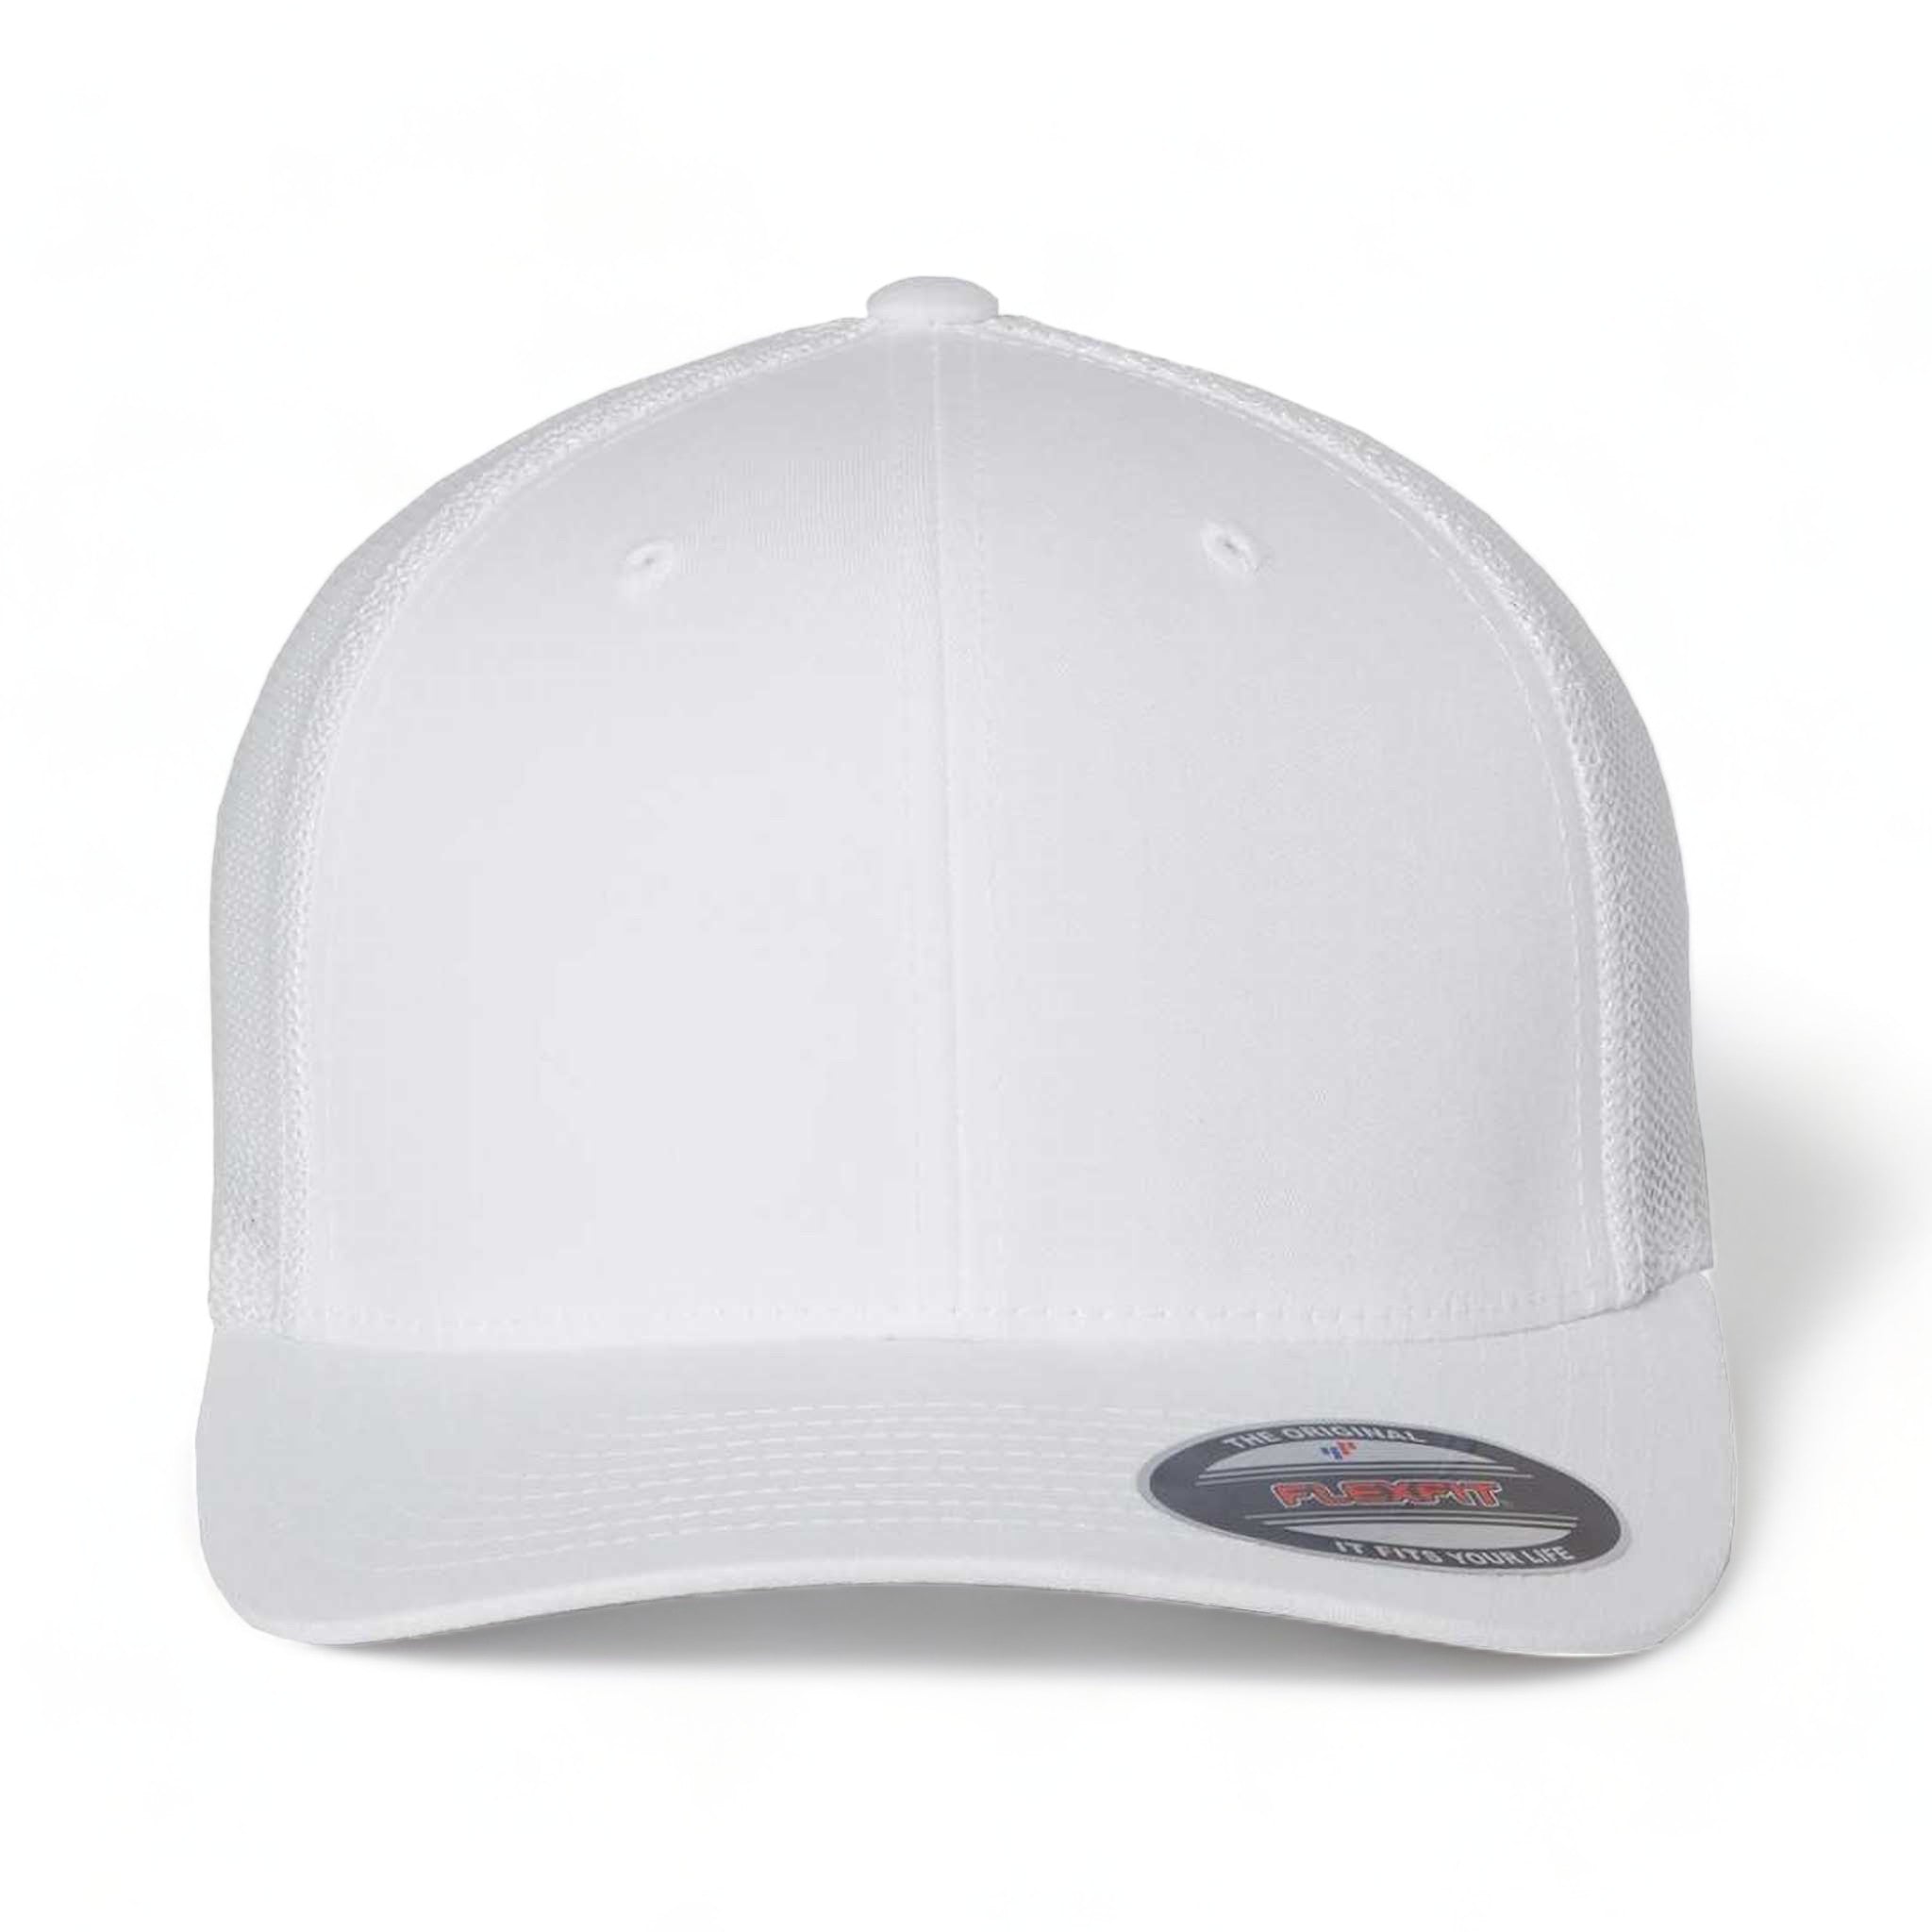 Front view of Flexfit 6511 custom hat in white